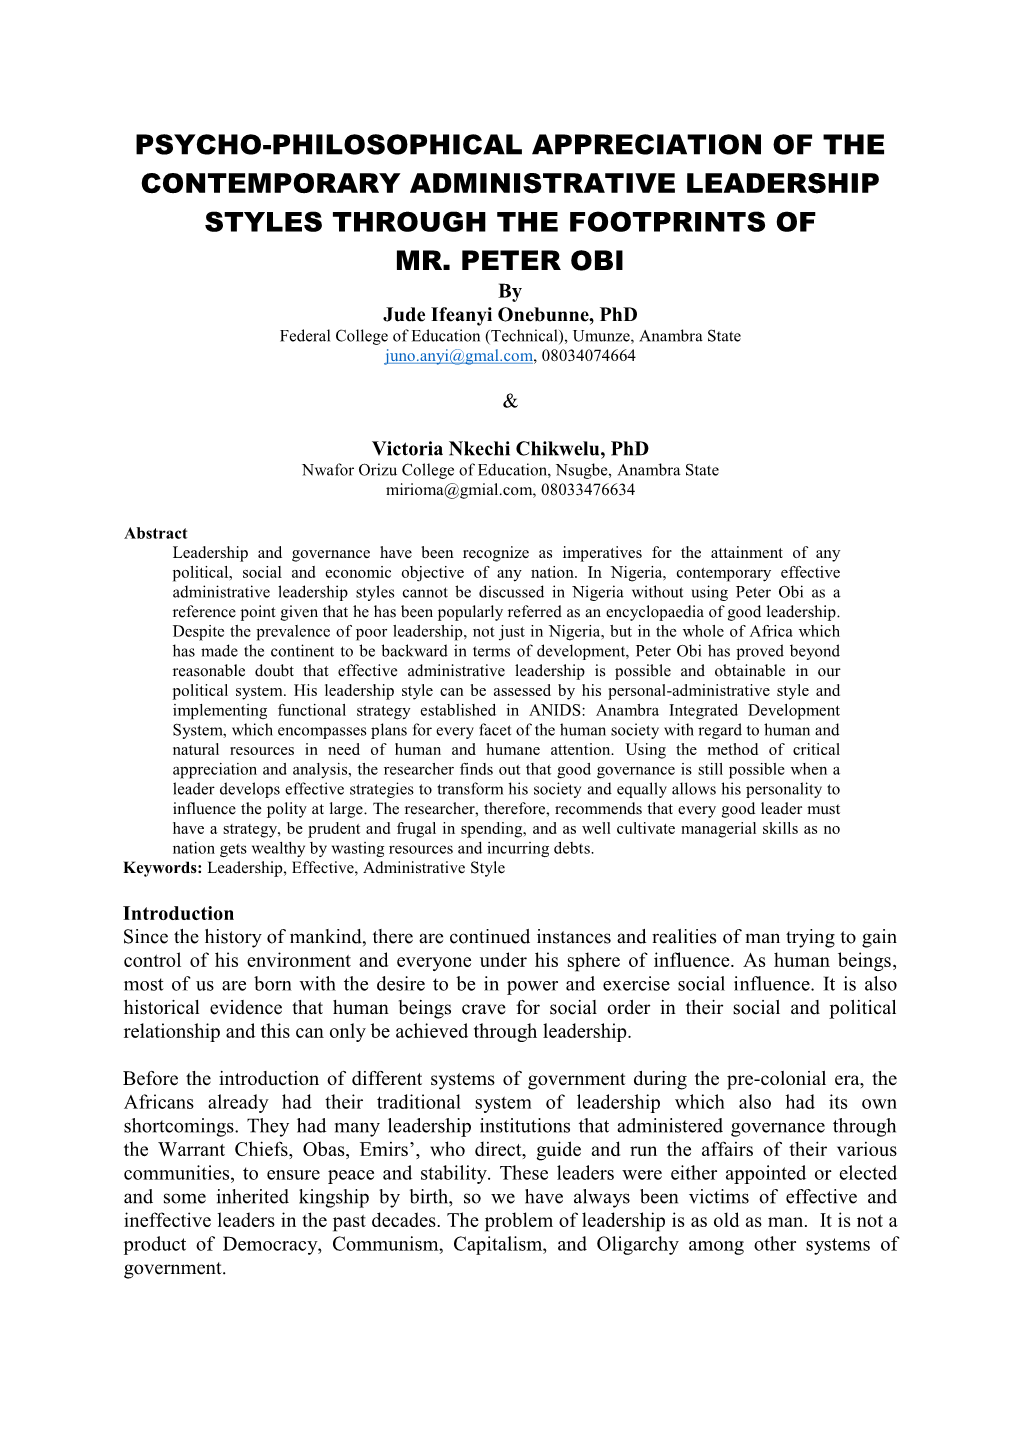 Psycho-Philosophical Appreciation of the Contemporary Administrative Leadership Styles Through the Footprints of Mr. Peter